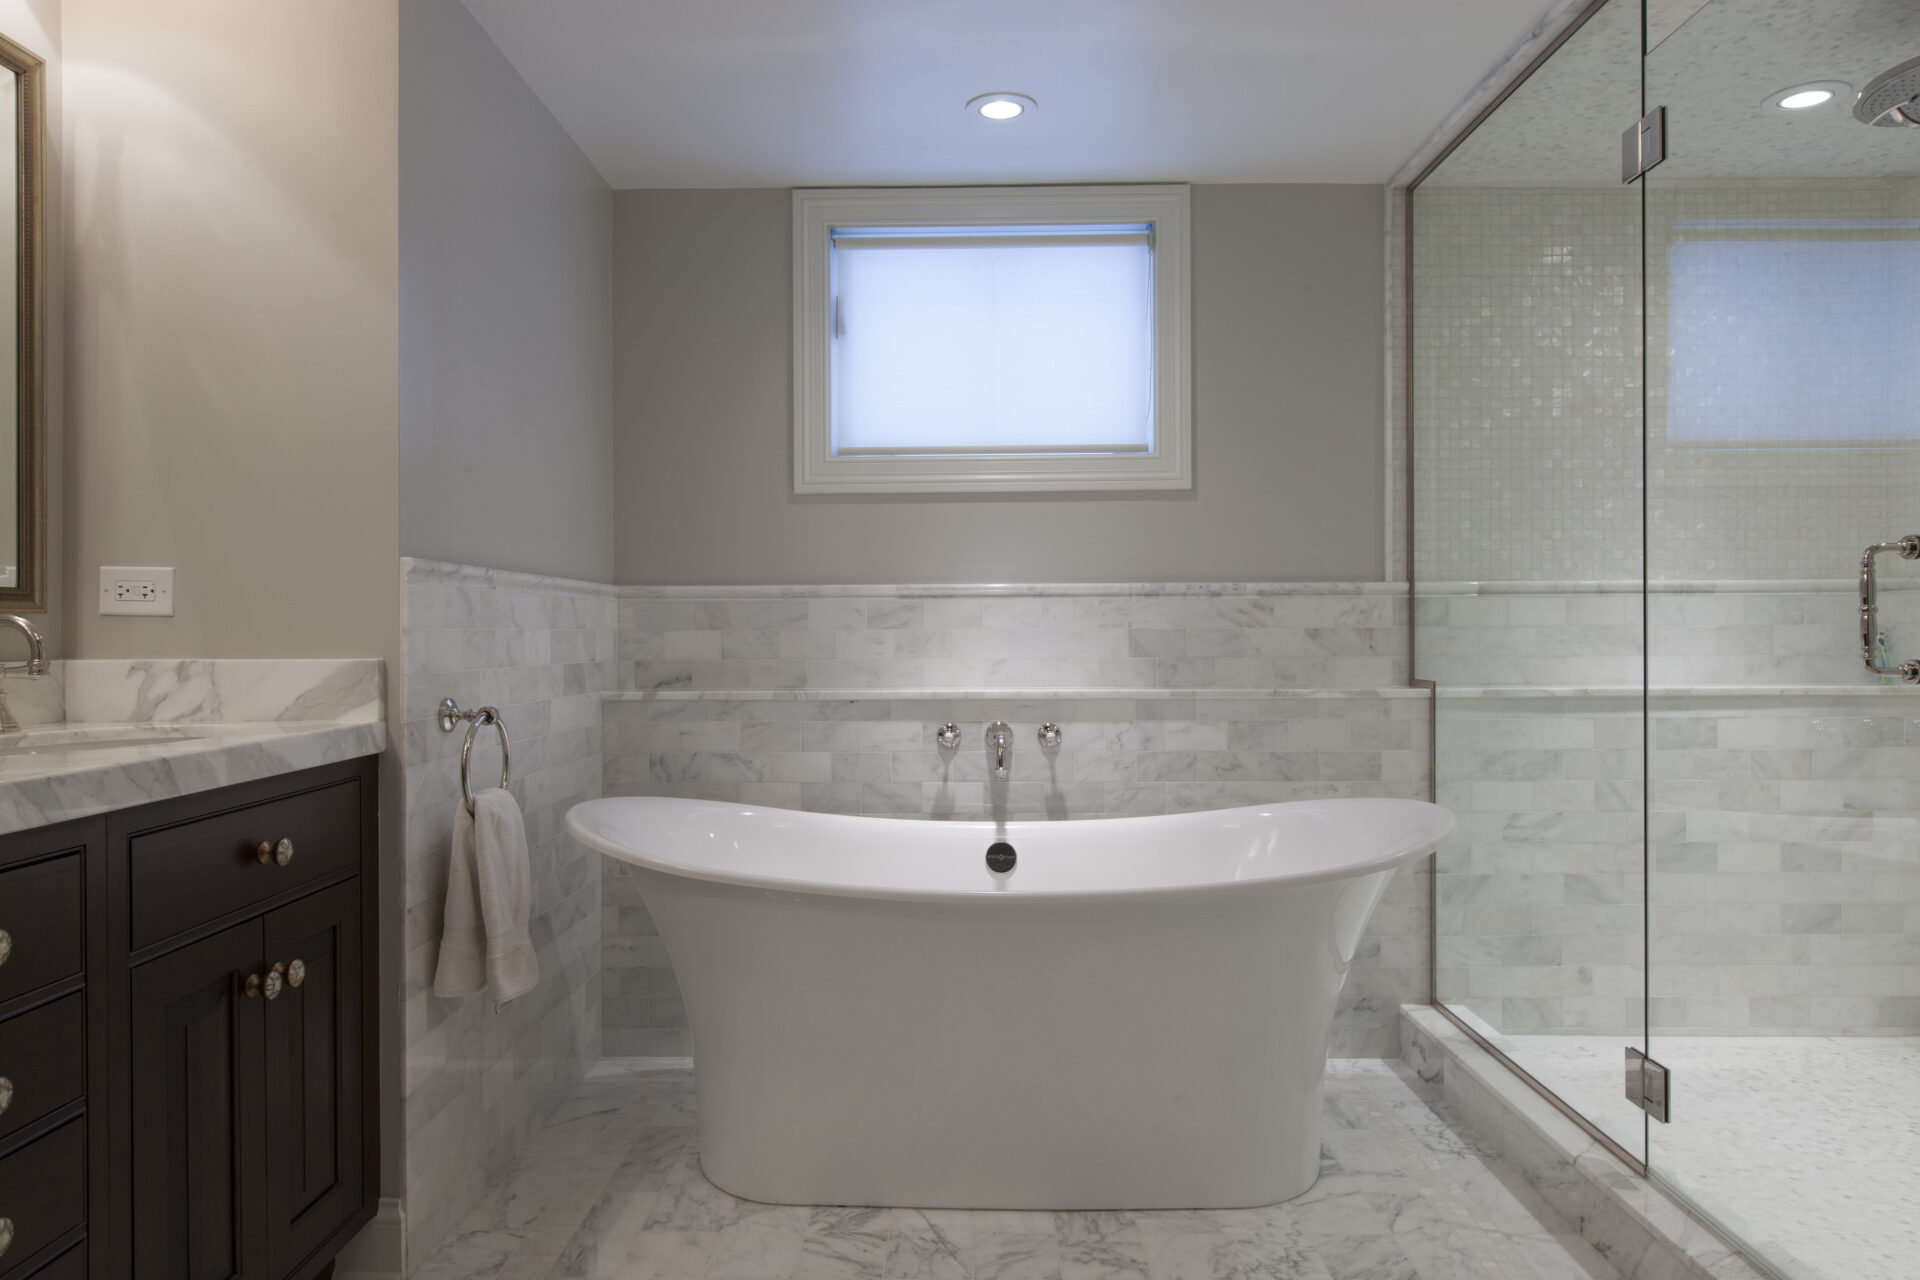 Bath space with tub and shower